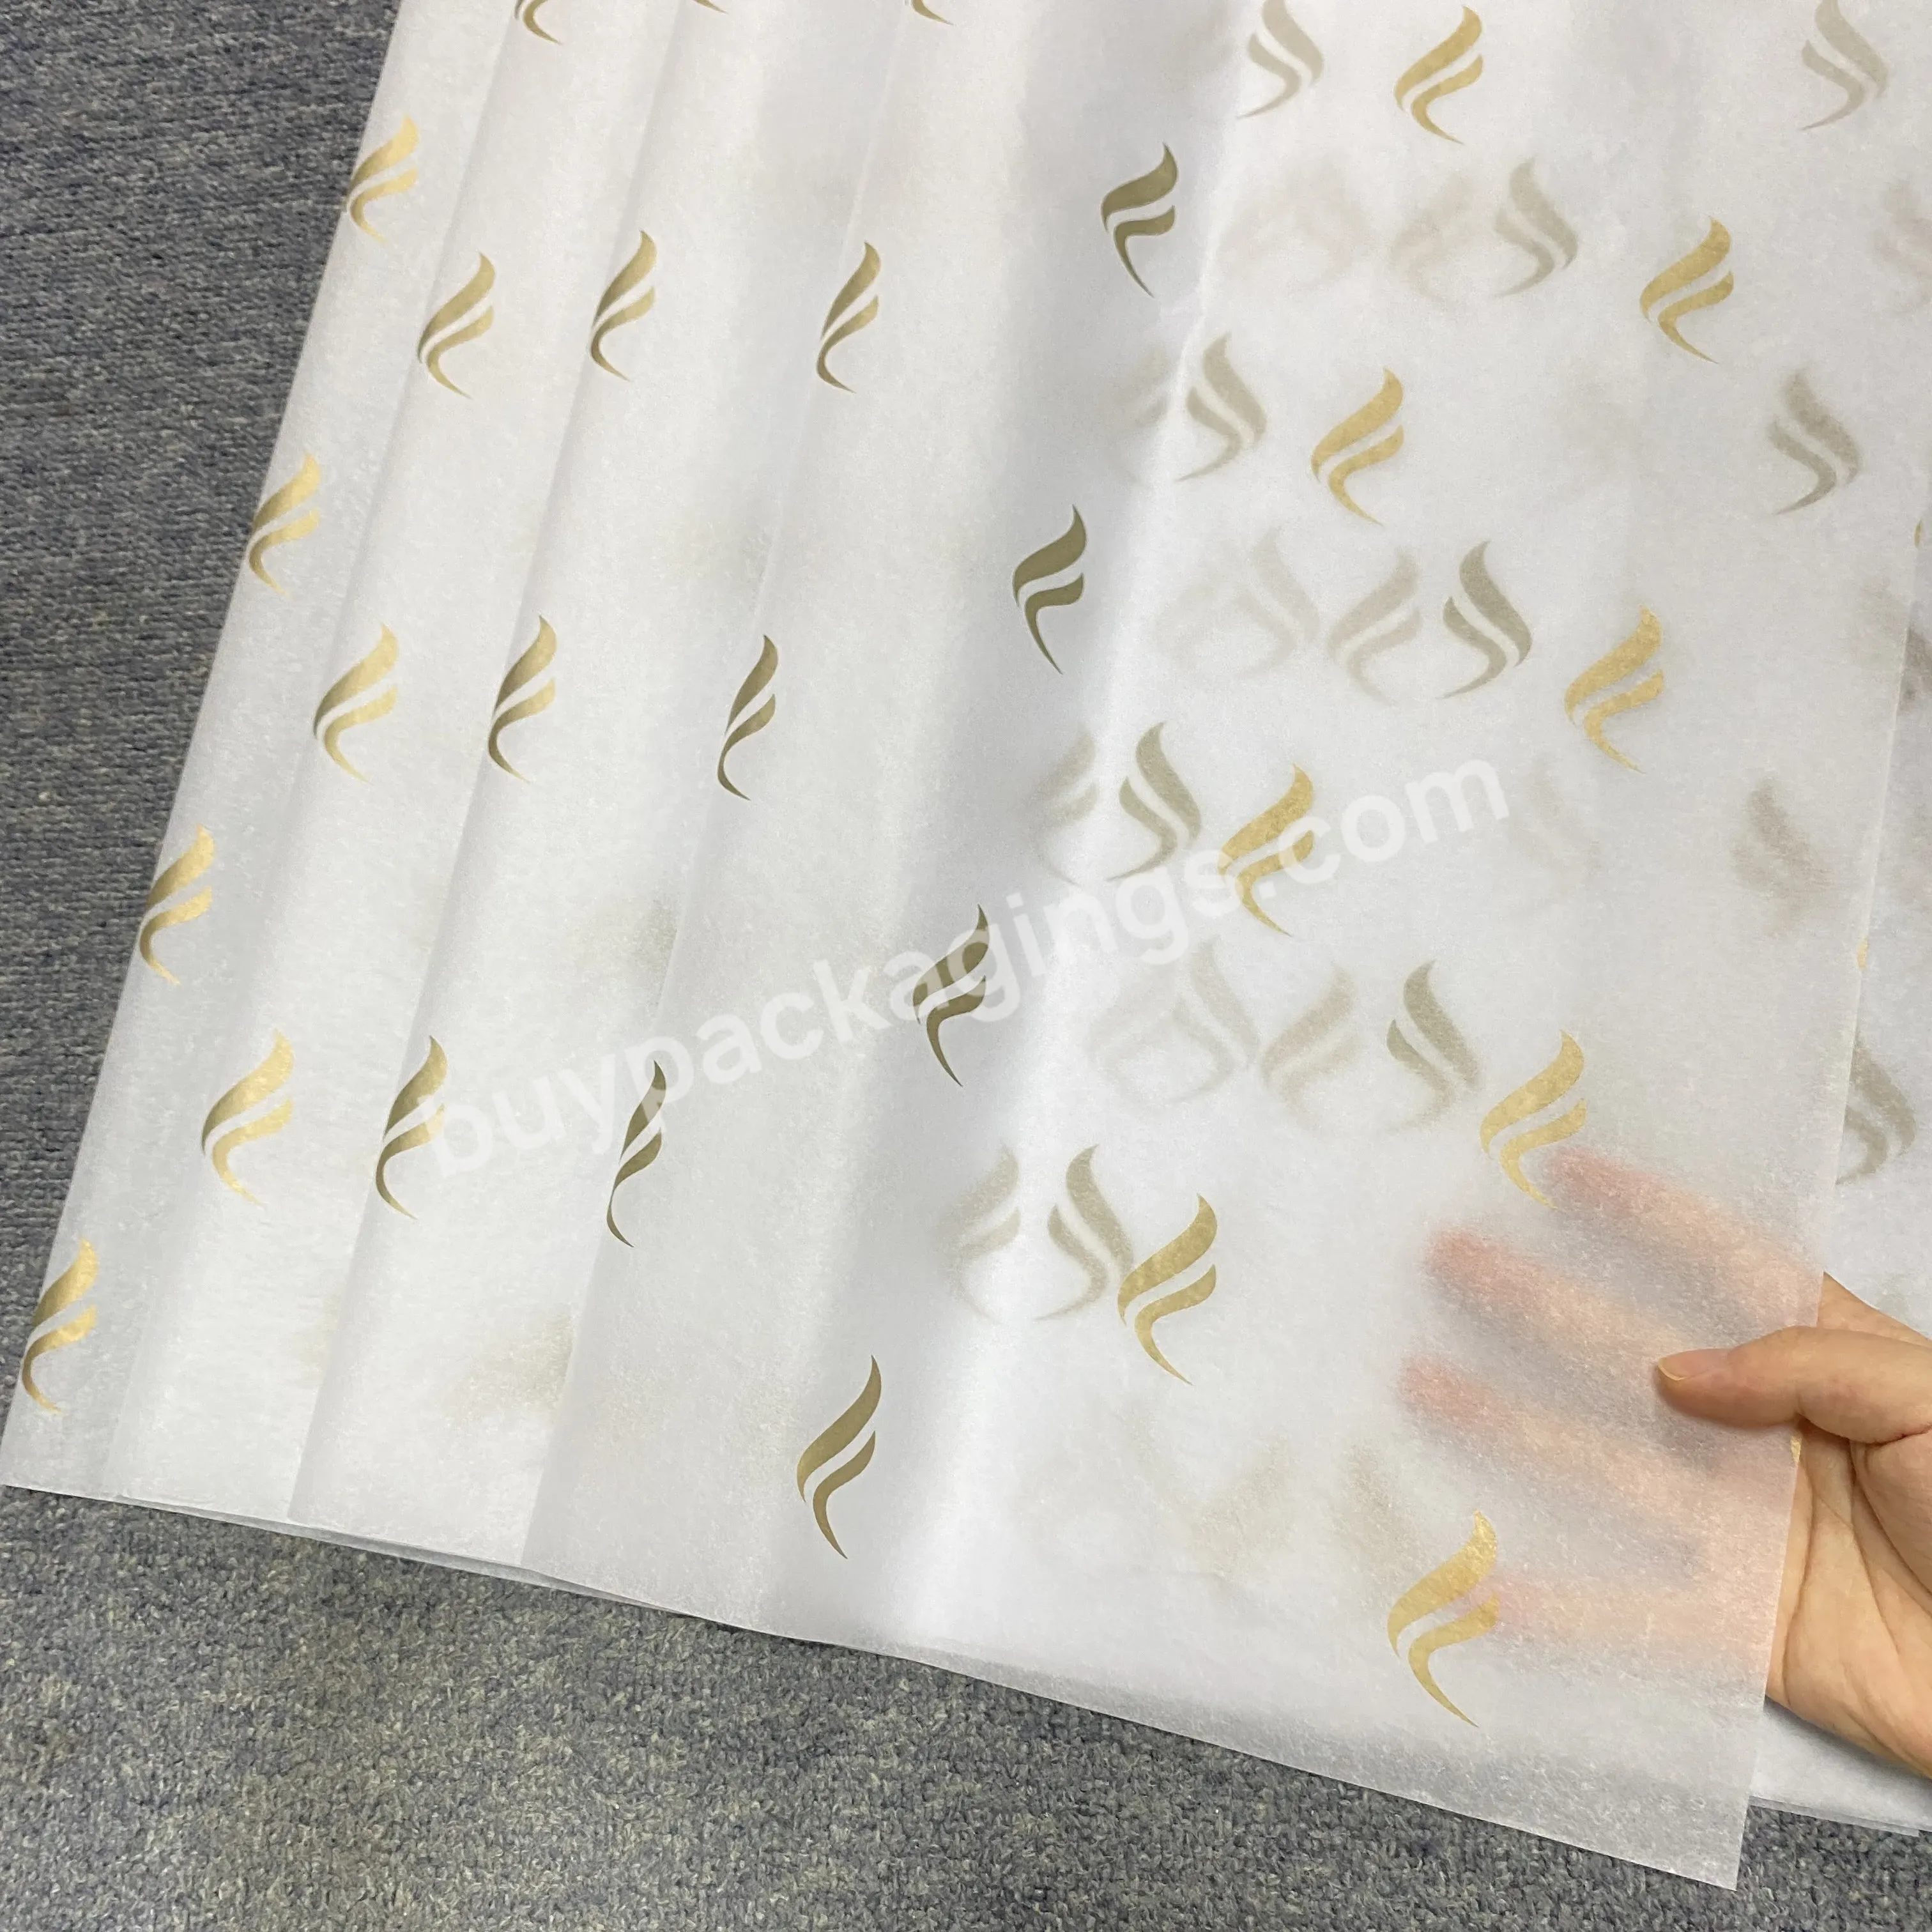 Fashionable Custom Printed Logo Tissue Wrapping Paper For Trending Products Packaging Clothes - Buy Wrapping Flowers And Clothing,Moq Is 100 Pcs,Customized Logo And Size.